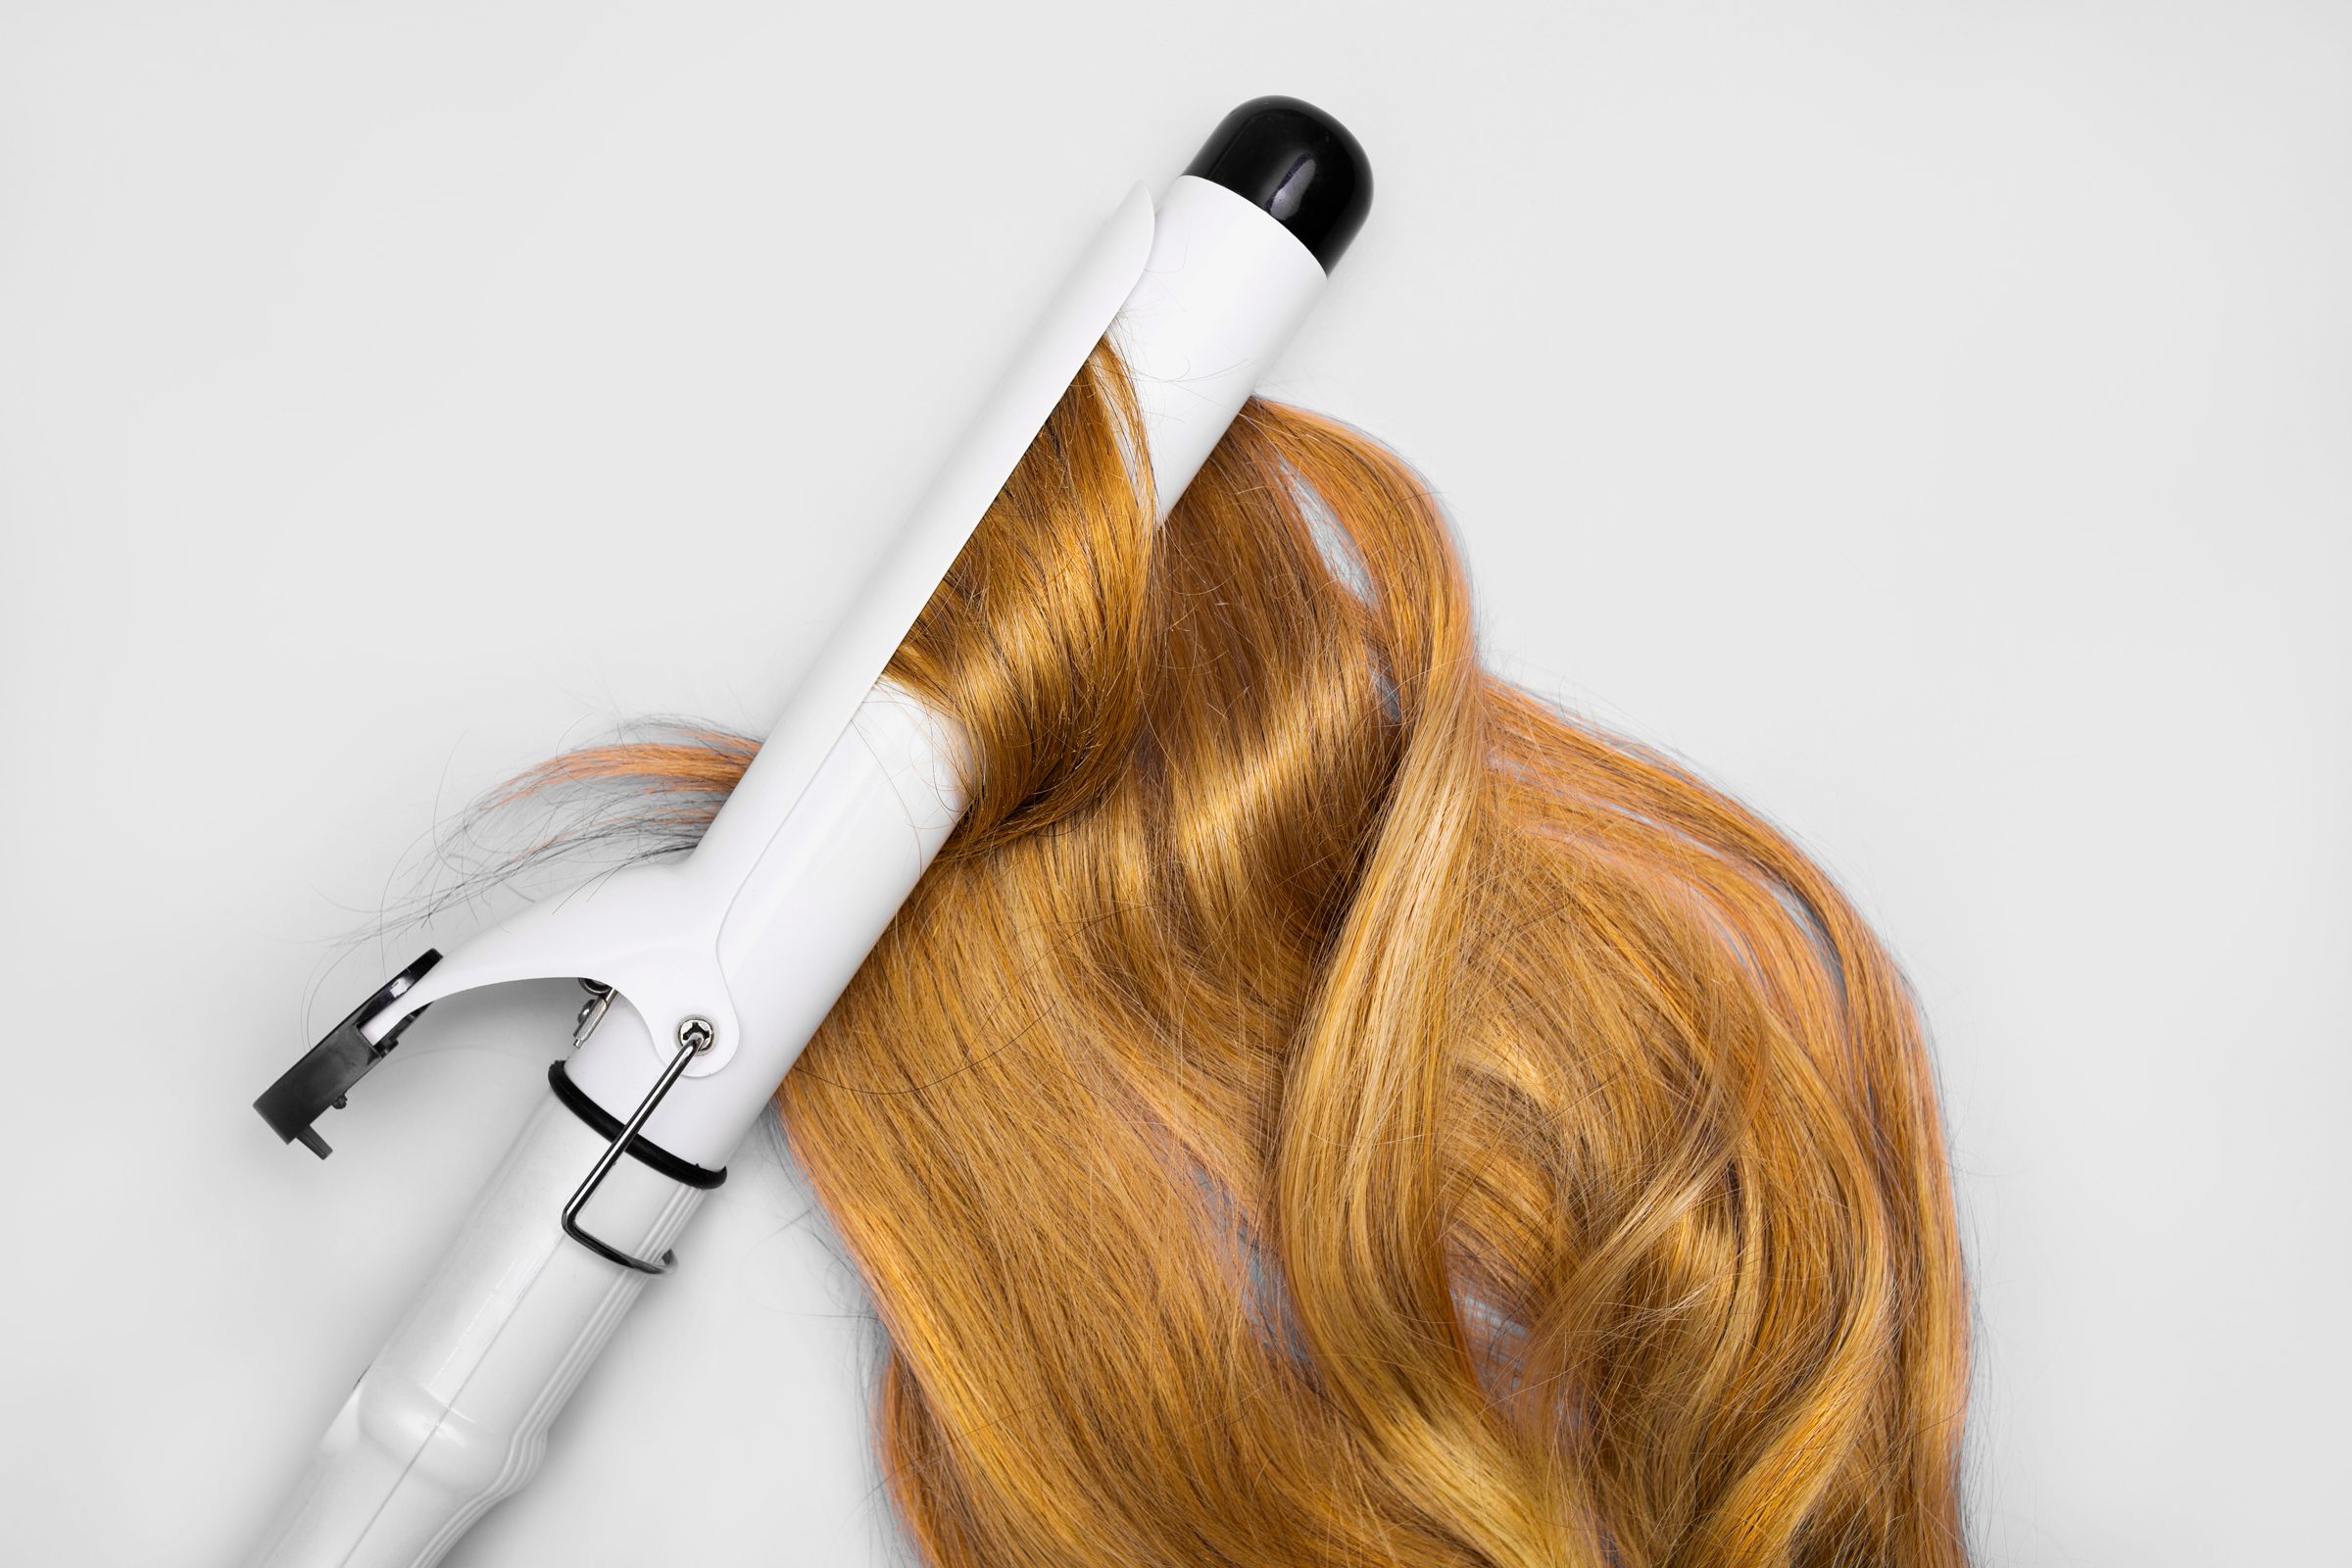 <p>These contain a butane-powered cartridge, which is at risk of exploding mid-flight. Bring your old-fashioned corded curling iron instead—or learn <a href="https://www.thehealthy.com/beauty/hair/curl-hair-without-curling-iron/" rel="noopener noreferrer">how to curl your hair without a curling iron</a>.</p>